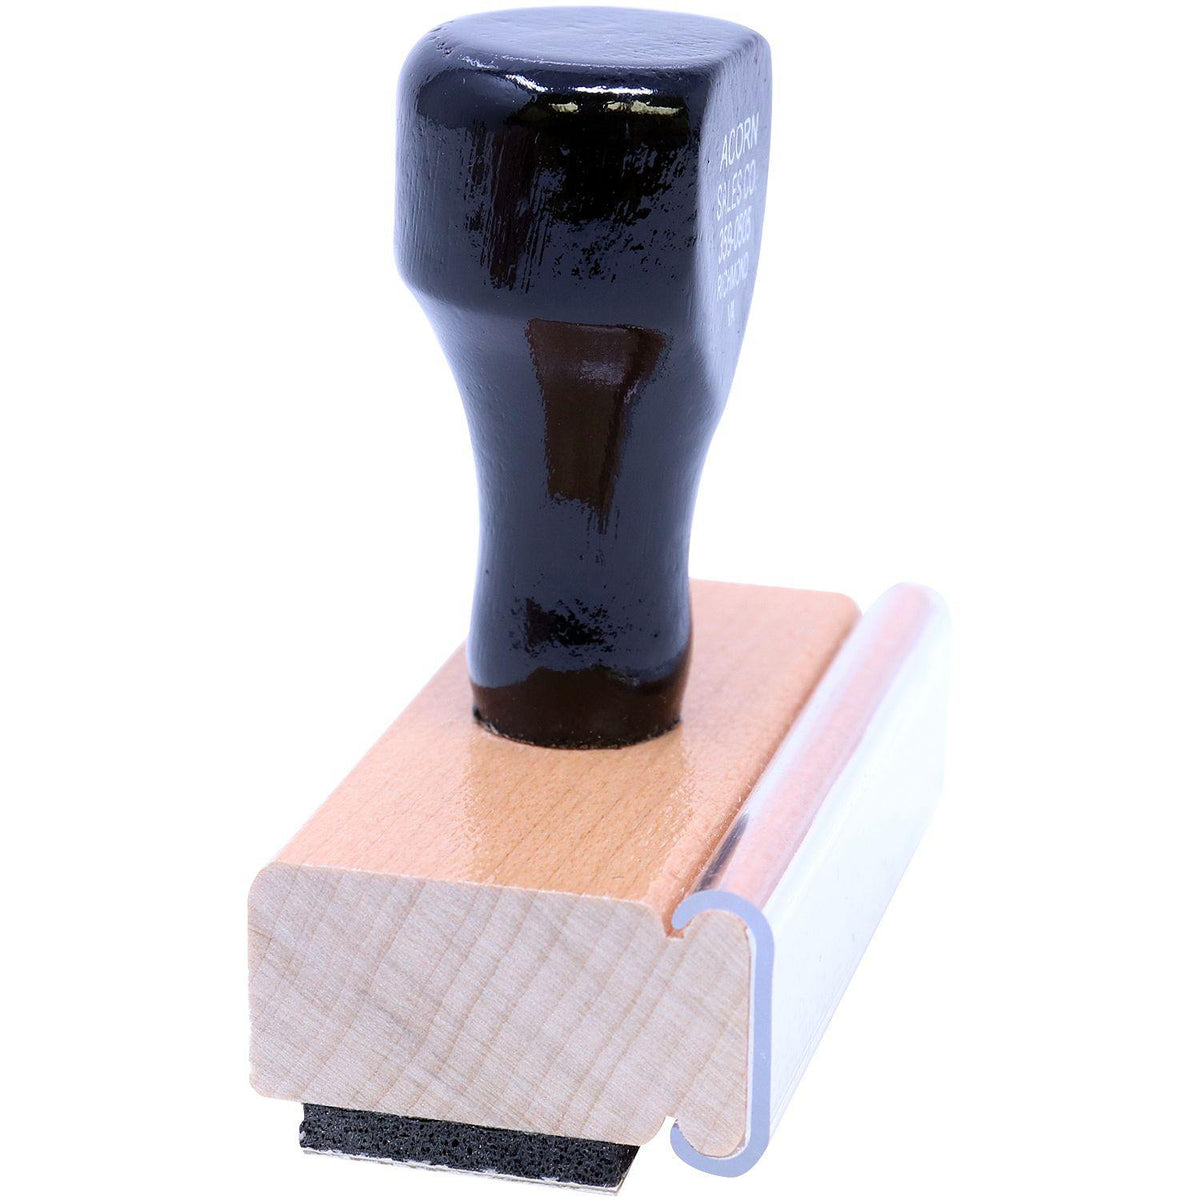 Side View of Economy Mail Rubber Stamp at an Angle